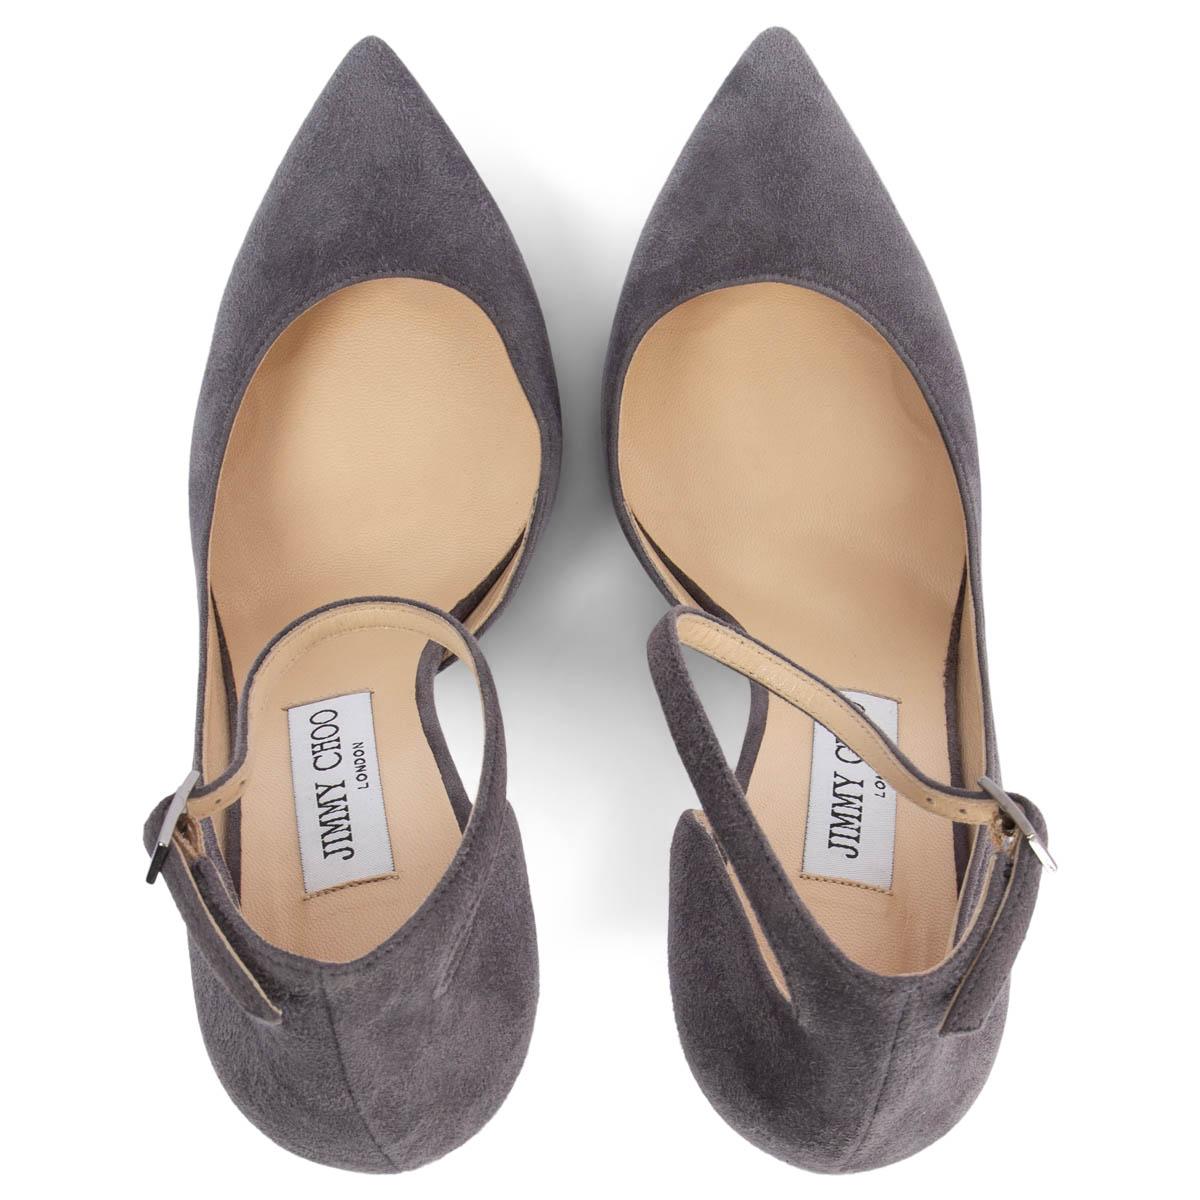 JIMMY CHOO grey suede LUCY ANKLE STRAP Pointed Toe Pumps Pumps Shoes 37.5 1